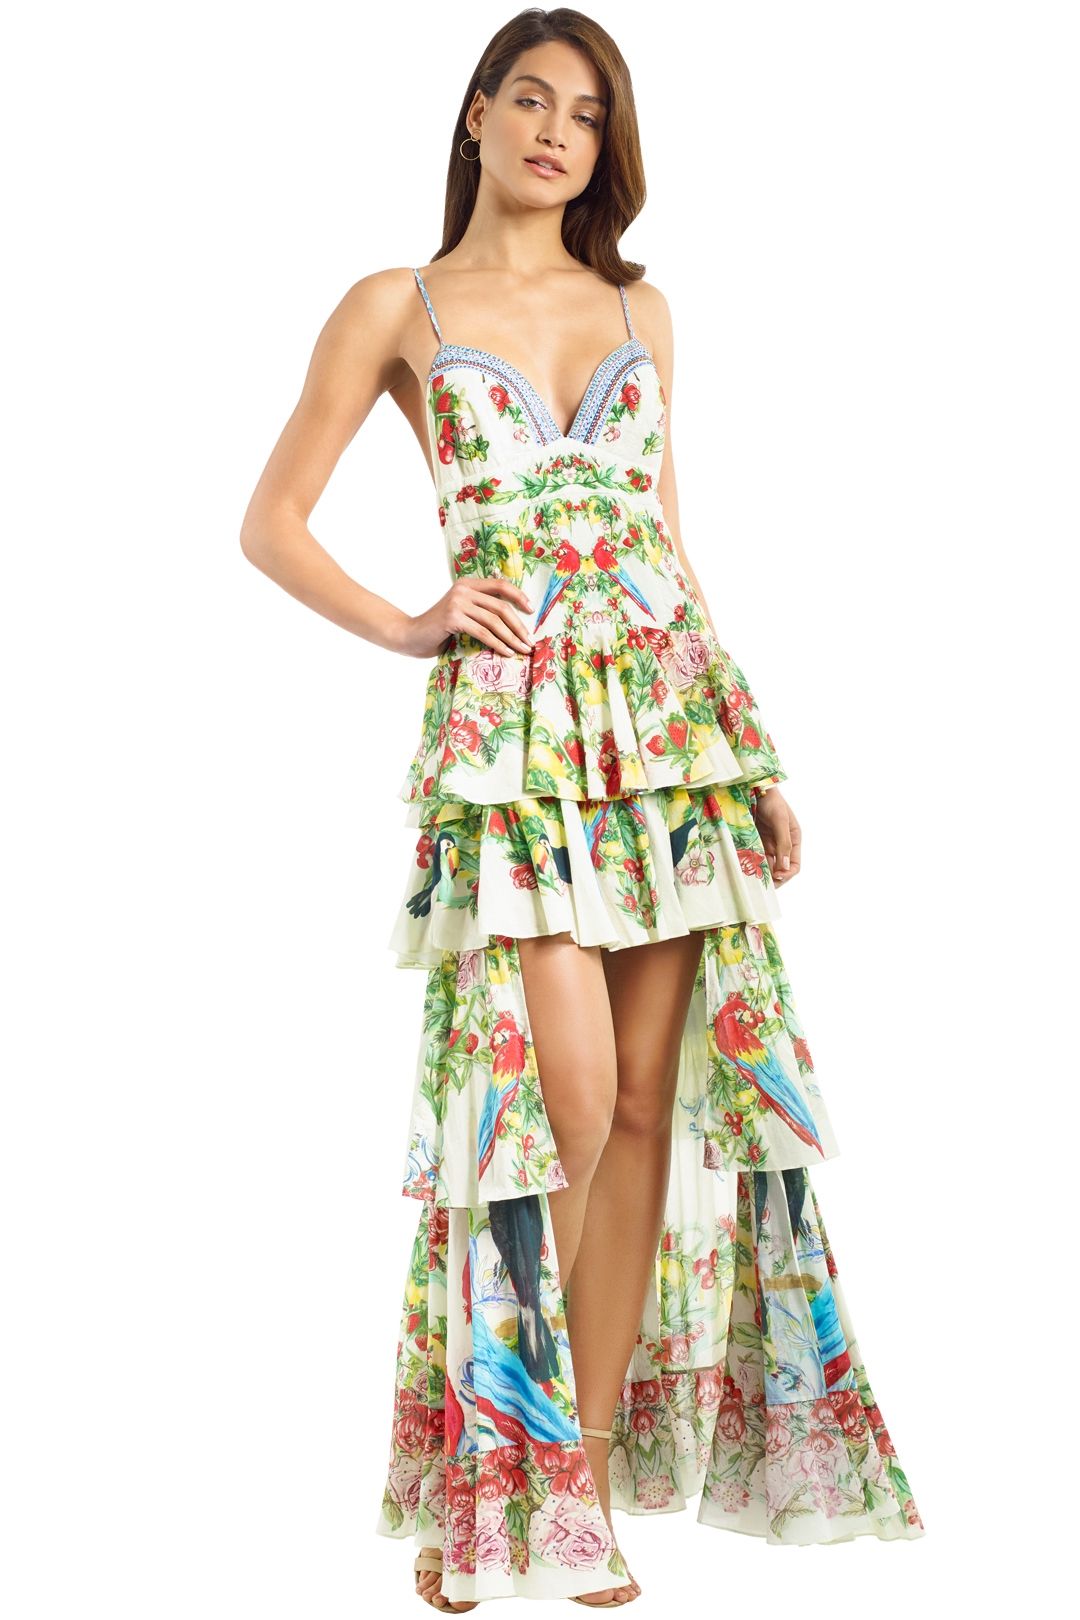 Camilla - Call Me Carmen Gathered Tiered Dress - Green - Front